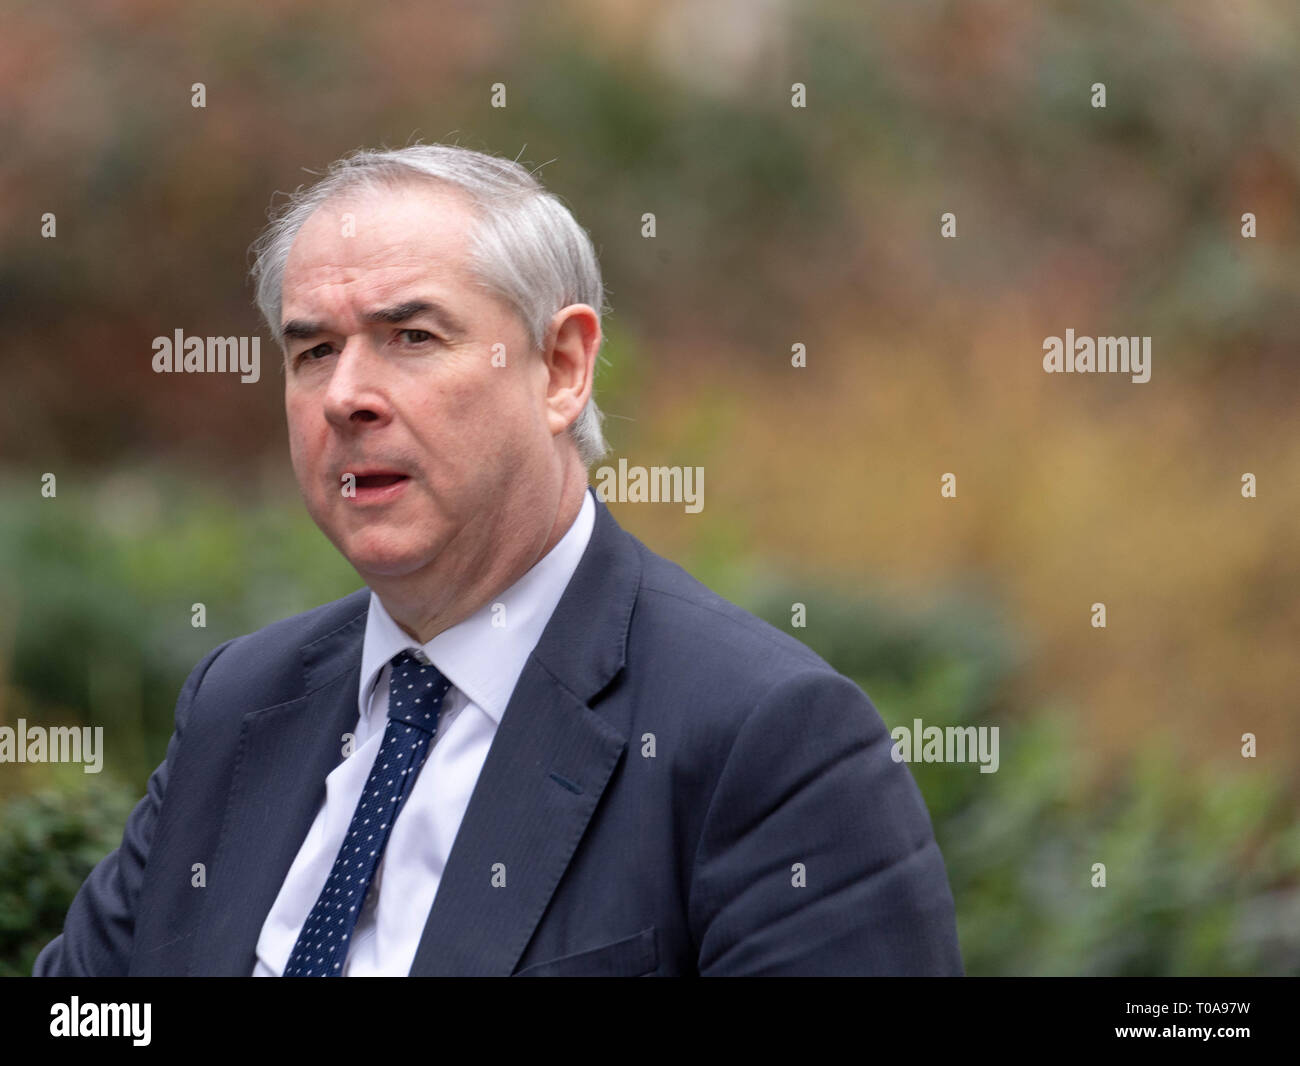 London, UK. 19th March 2019, Geoffrey Cox QC MP arrives at a Cabinet meeting at 10 Downing Street, London, UK. Credit: Ian Davidson/Alamy Live News Stock Photo